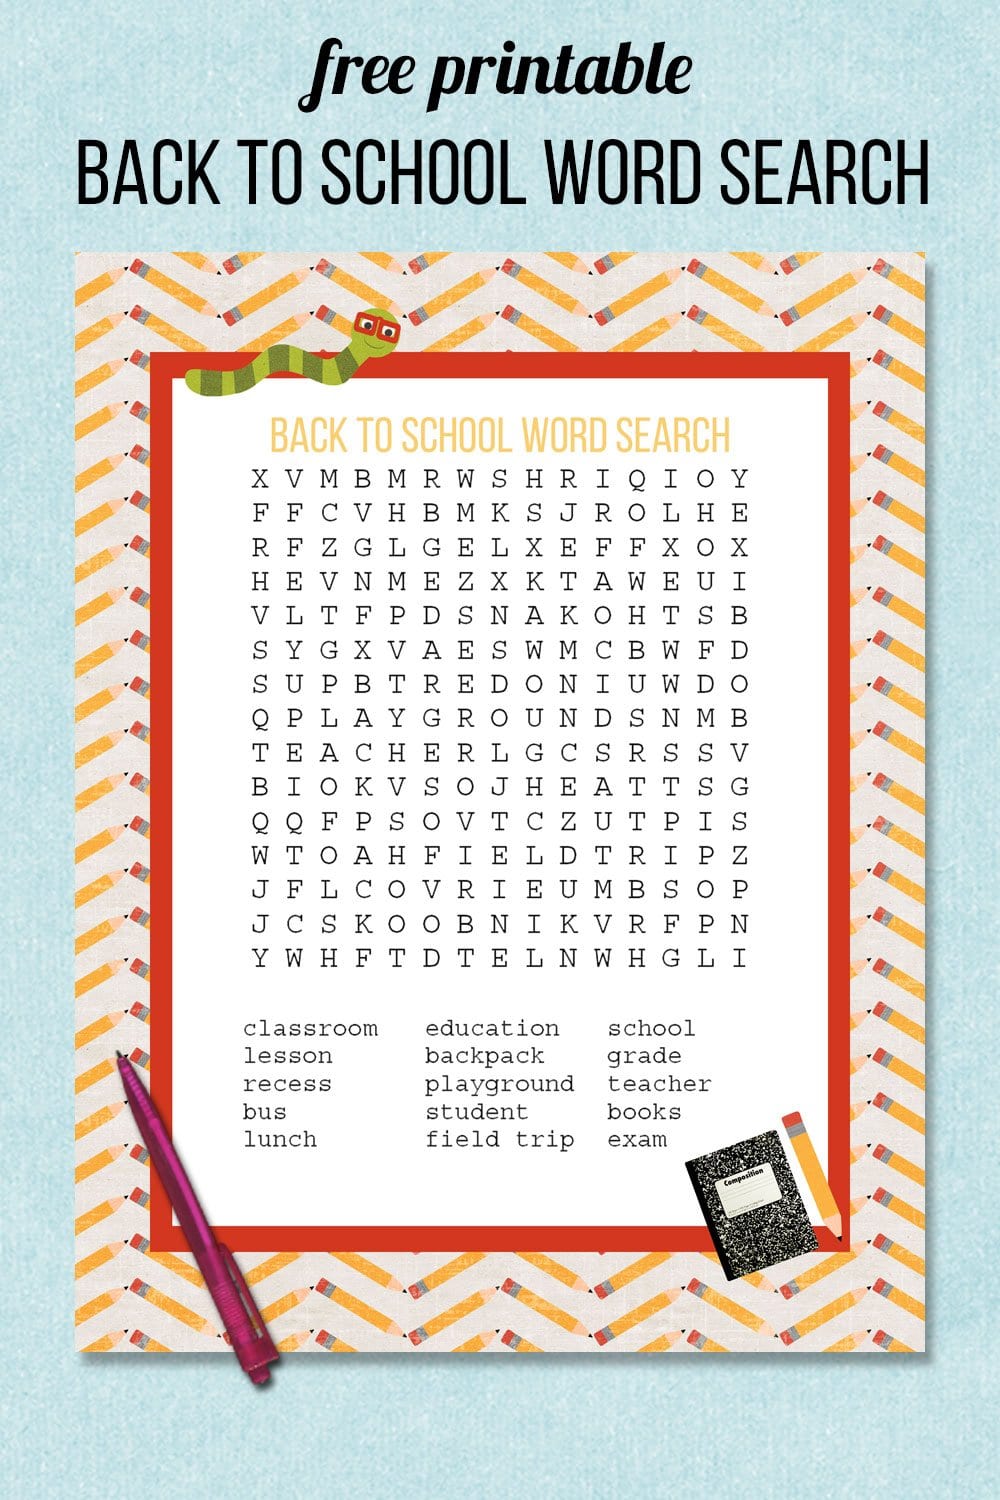 free printable back to school word search